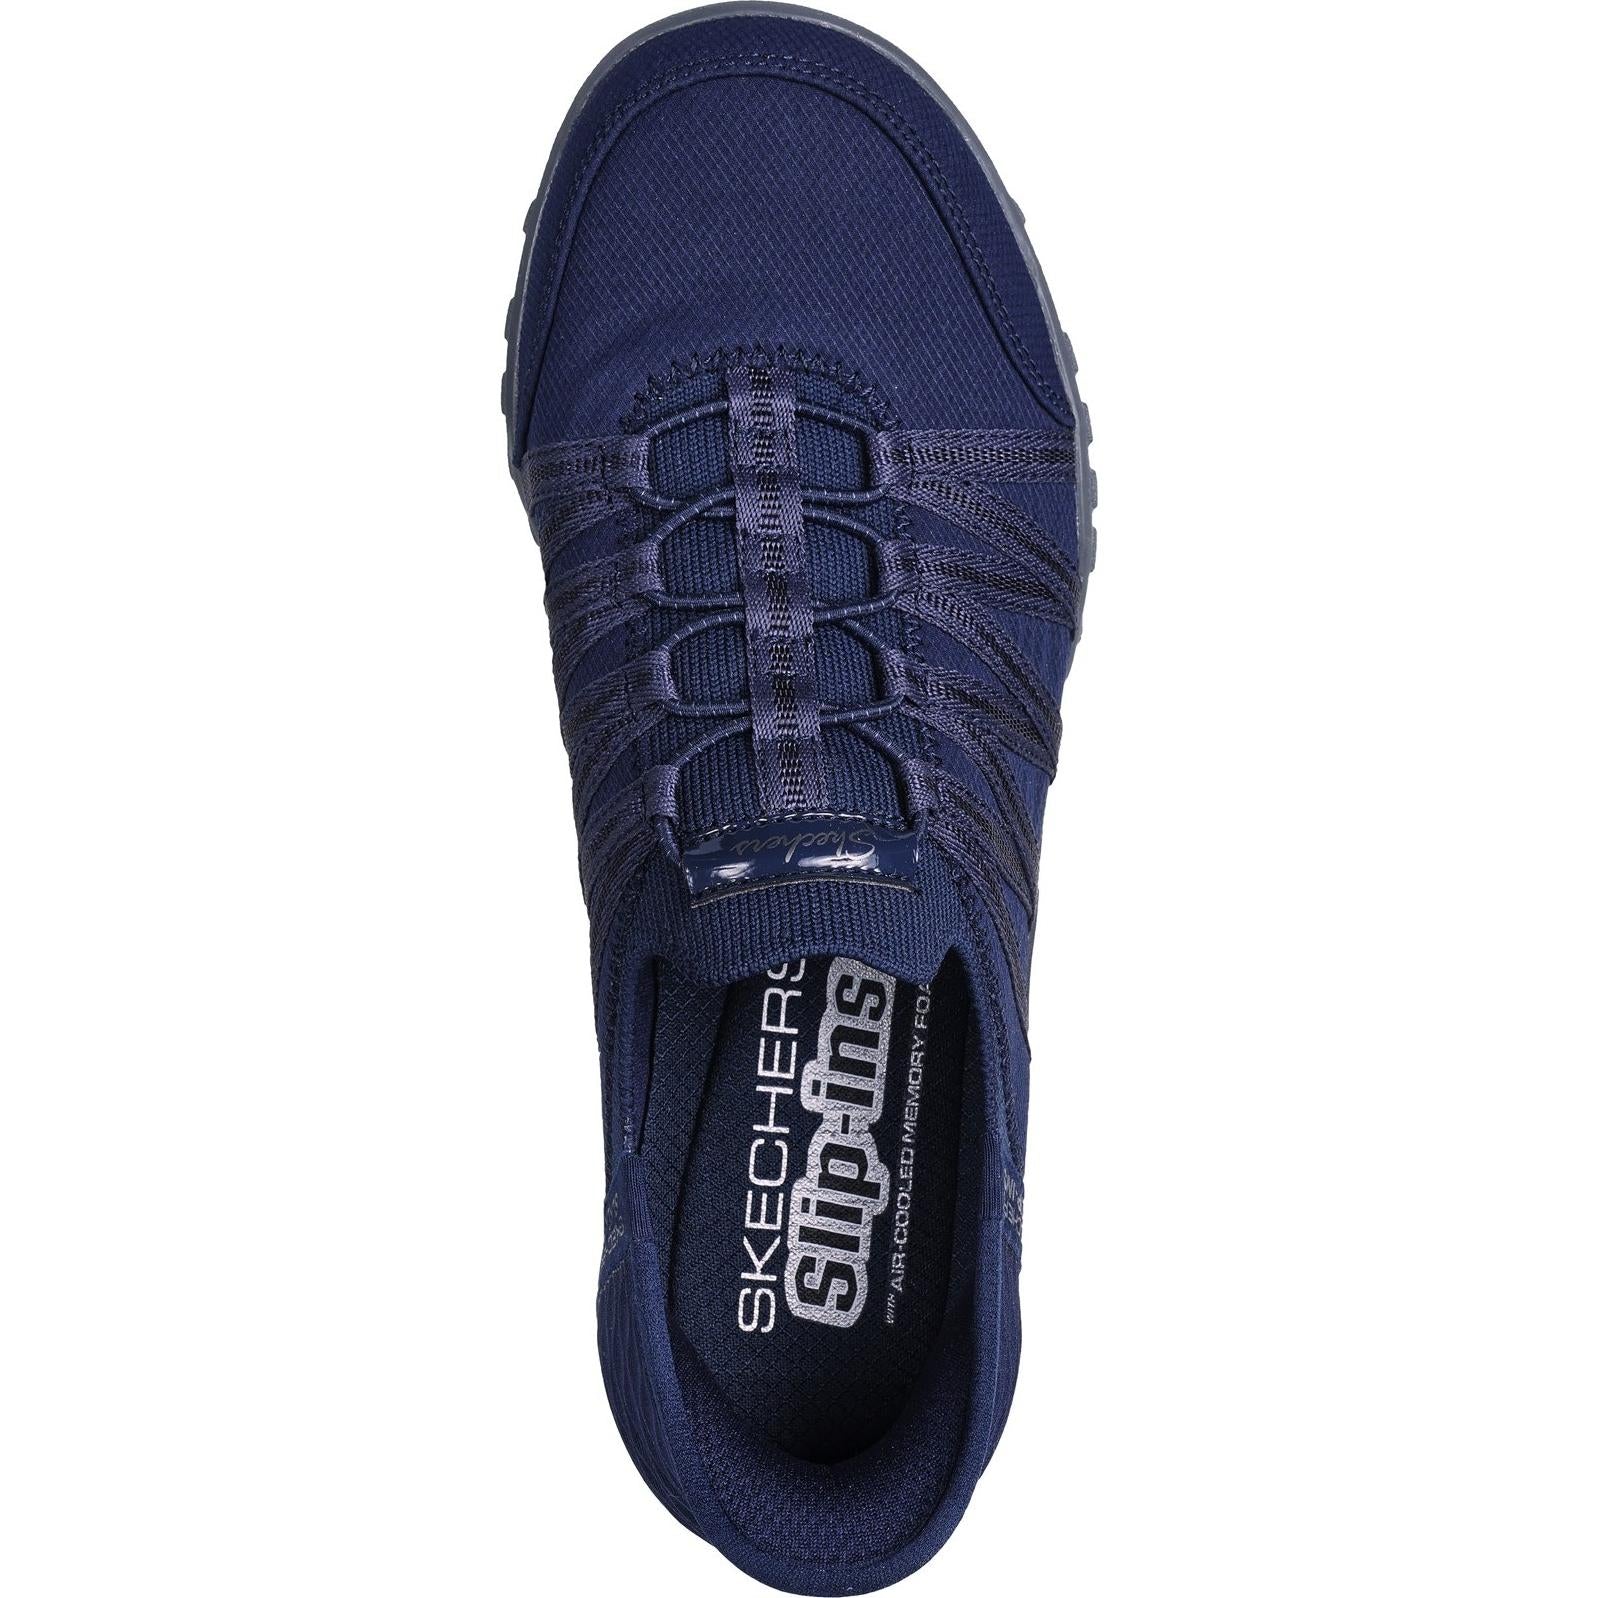 Skechers Breathe-Easy - Roll-With-Me Shoe